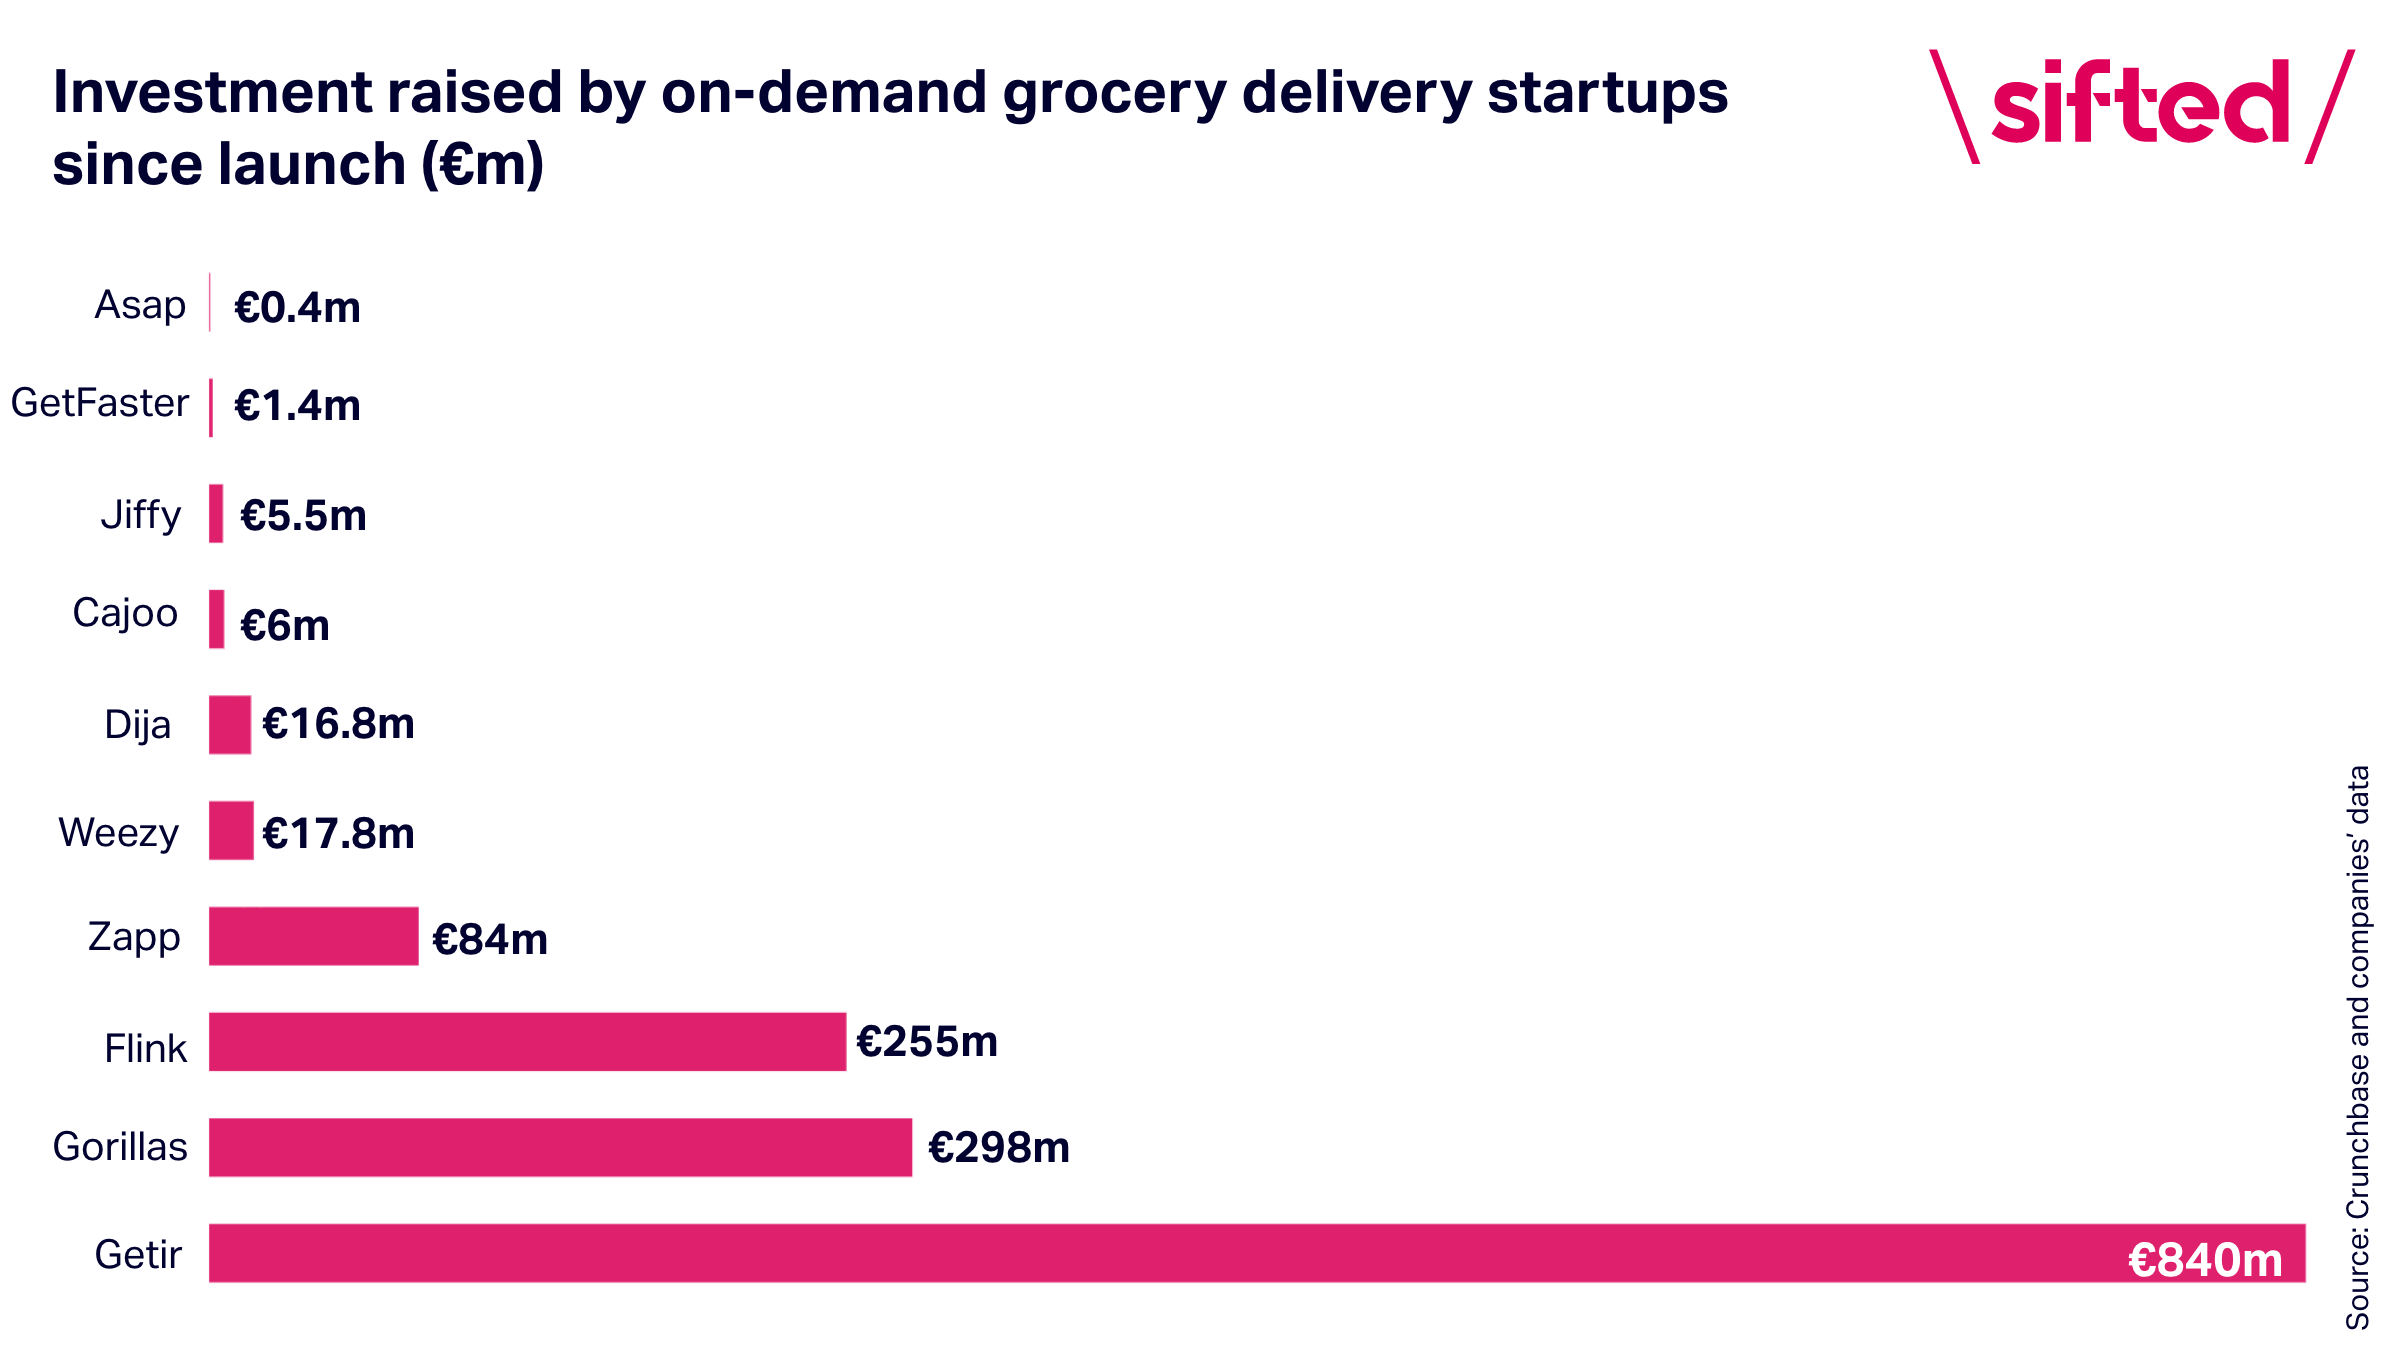 on-demand grocery funding rounds